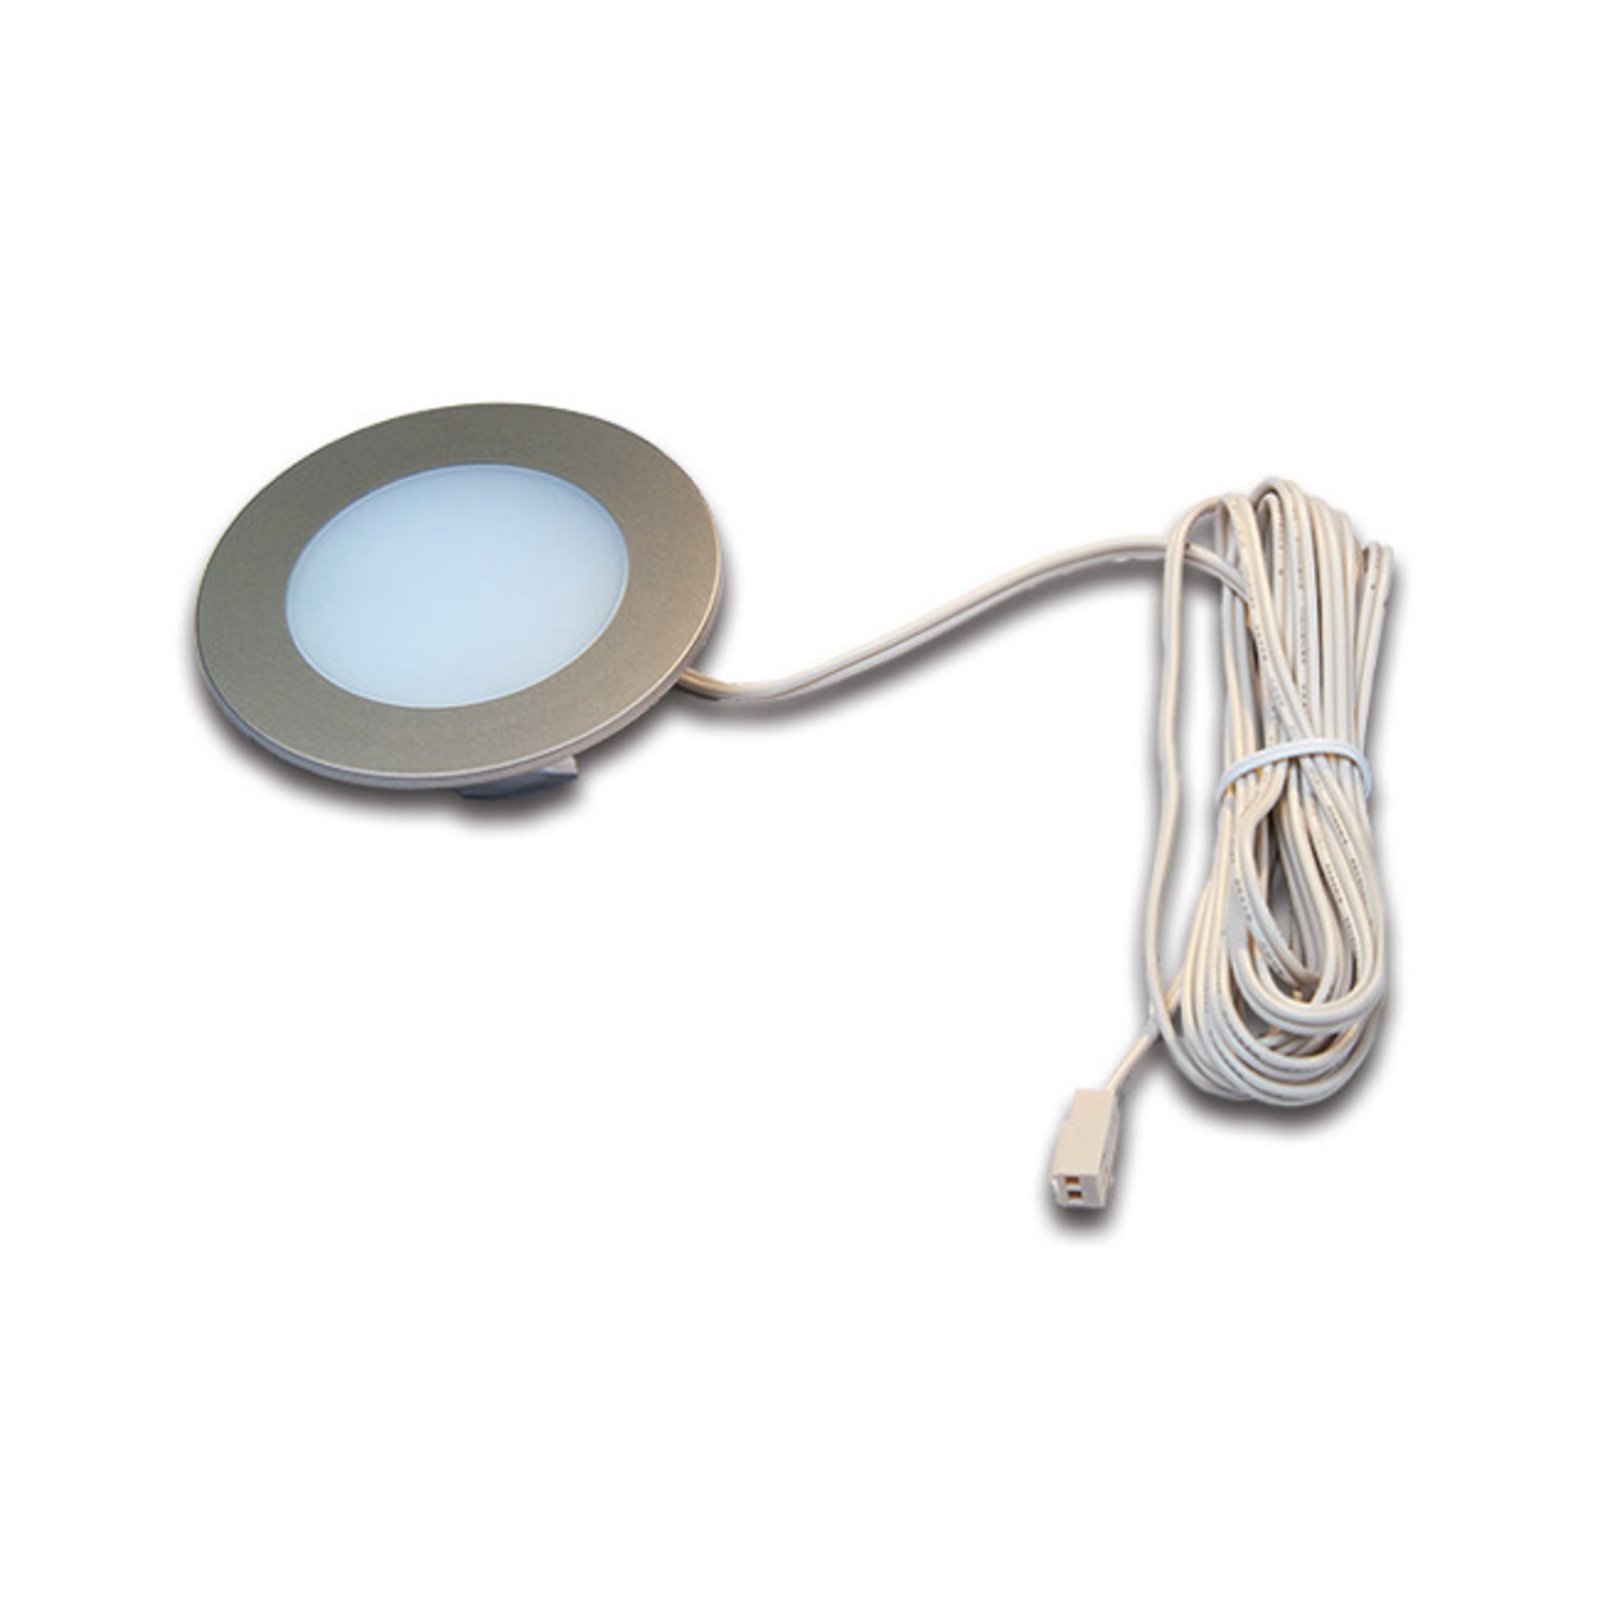 FR 55 LED furniture lamp, stainless steel finish